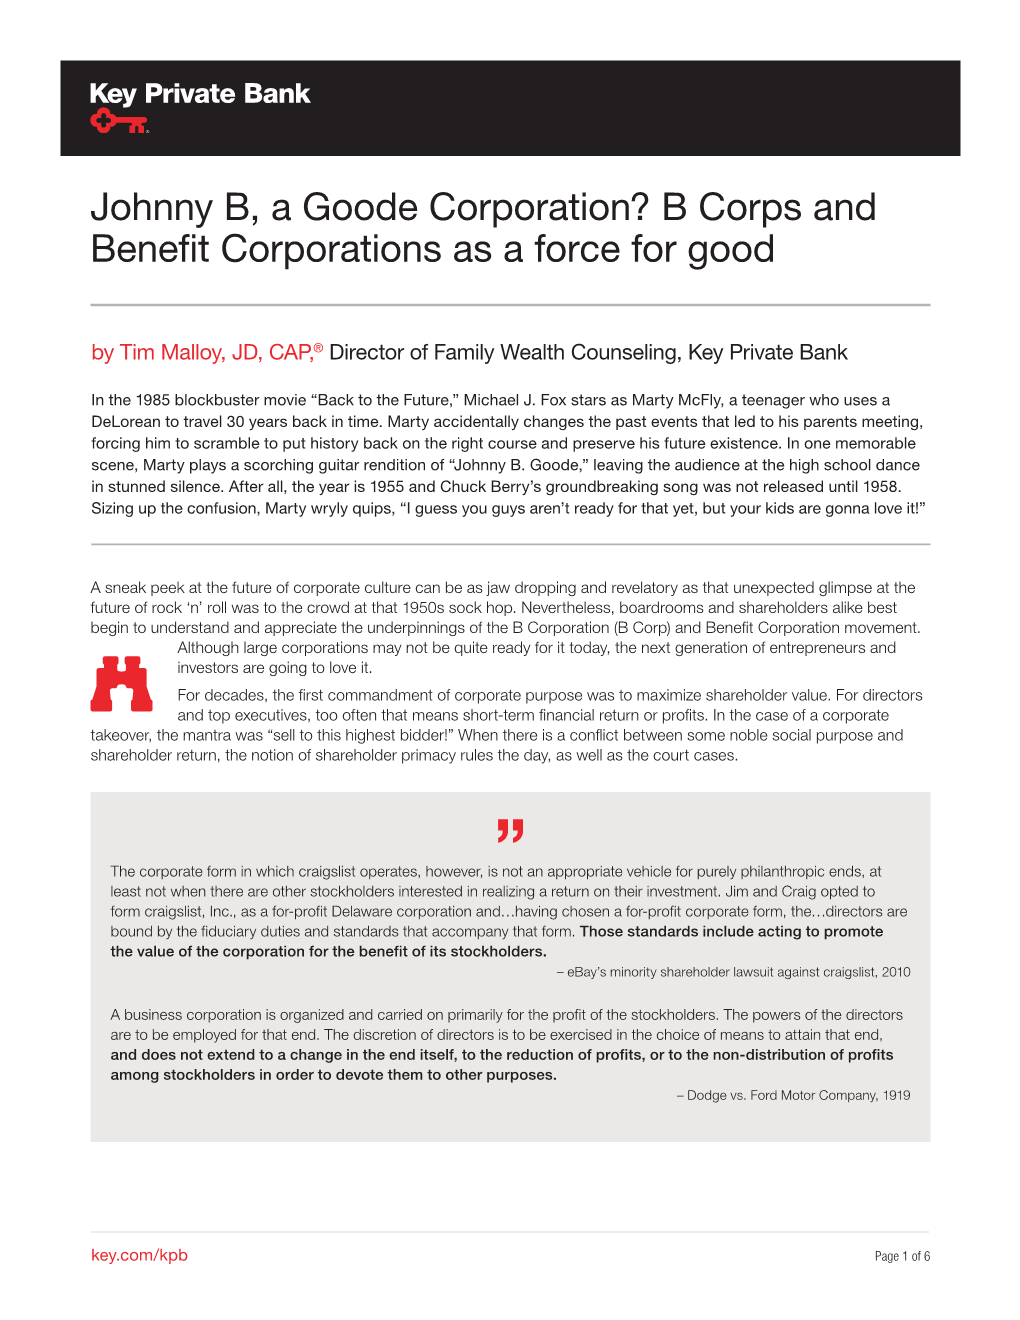 Johnny B, a Goode Corporation? B Corps and Benefit Corporations As a Force for Good